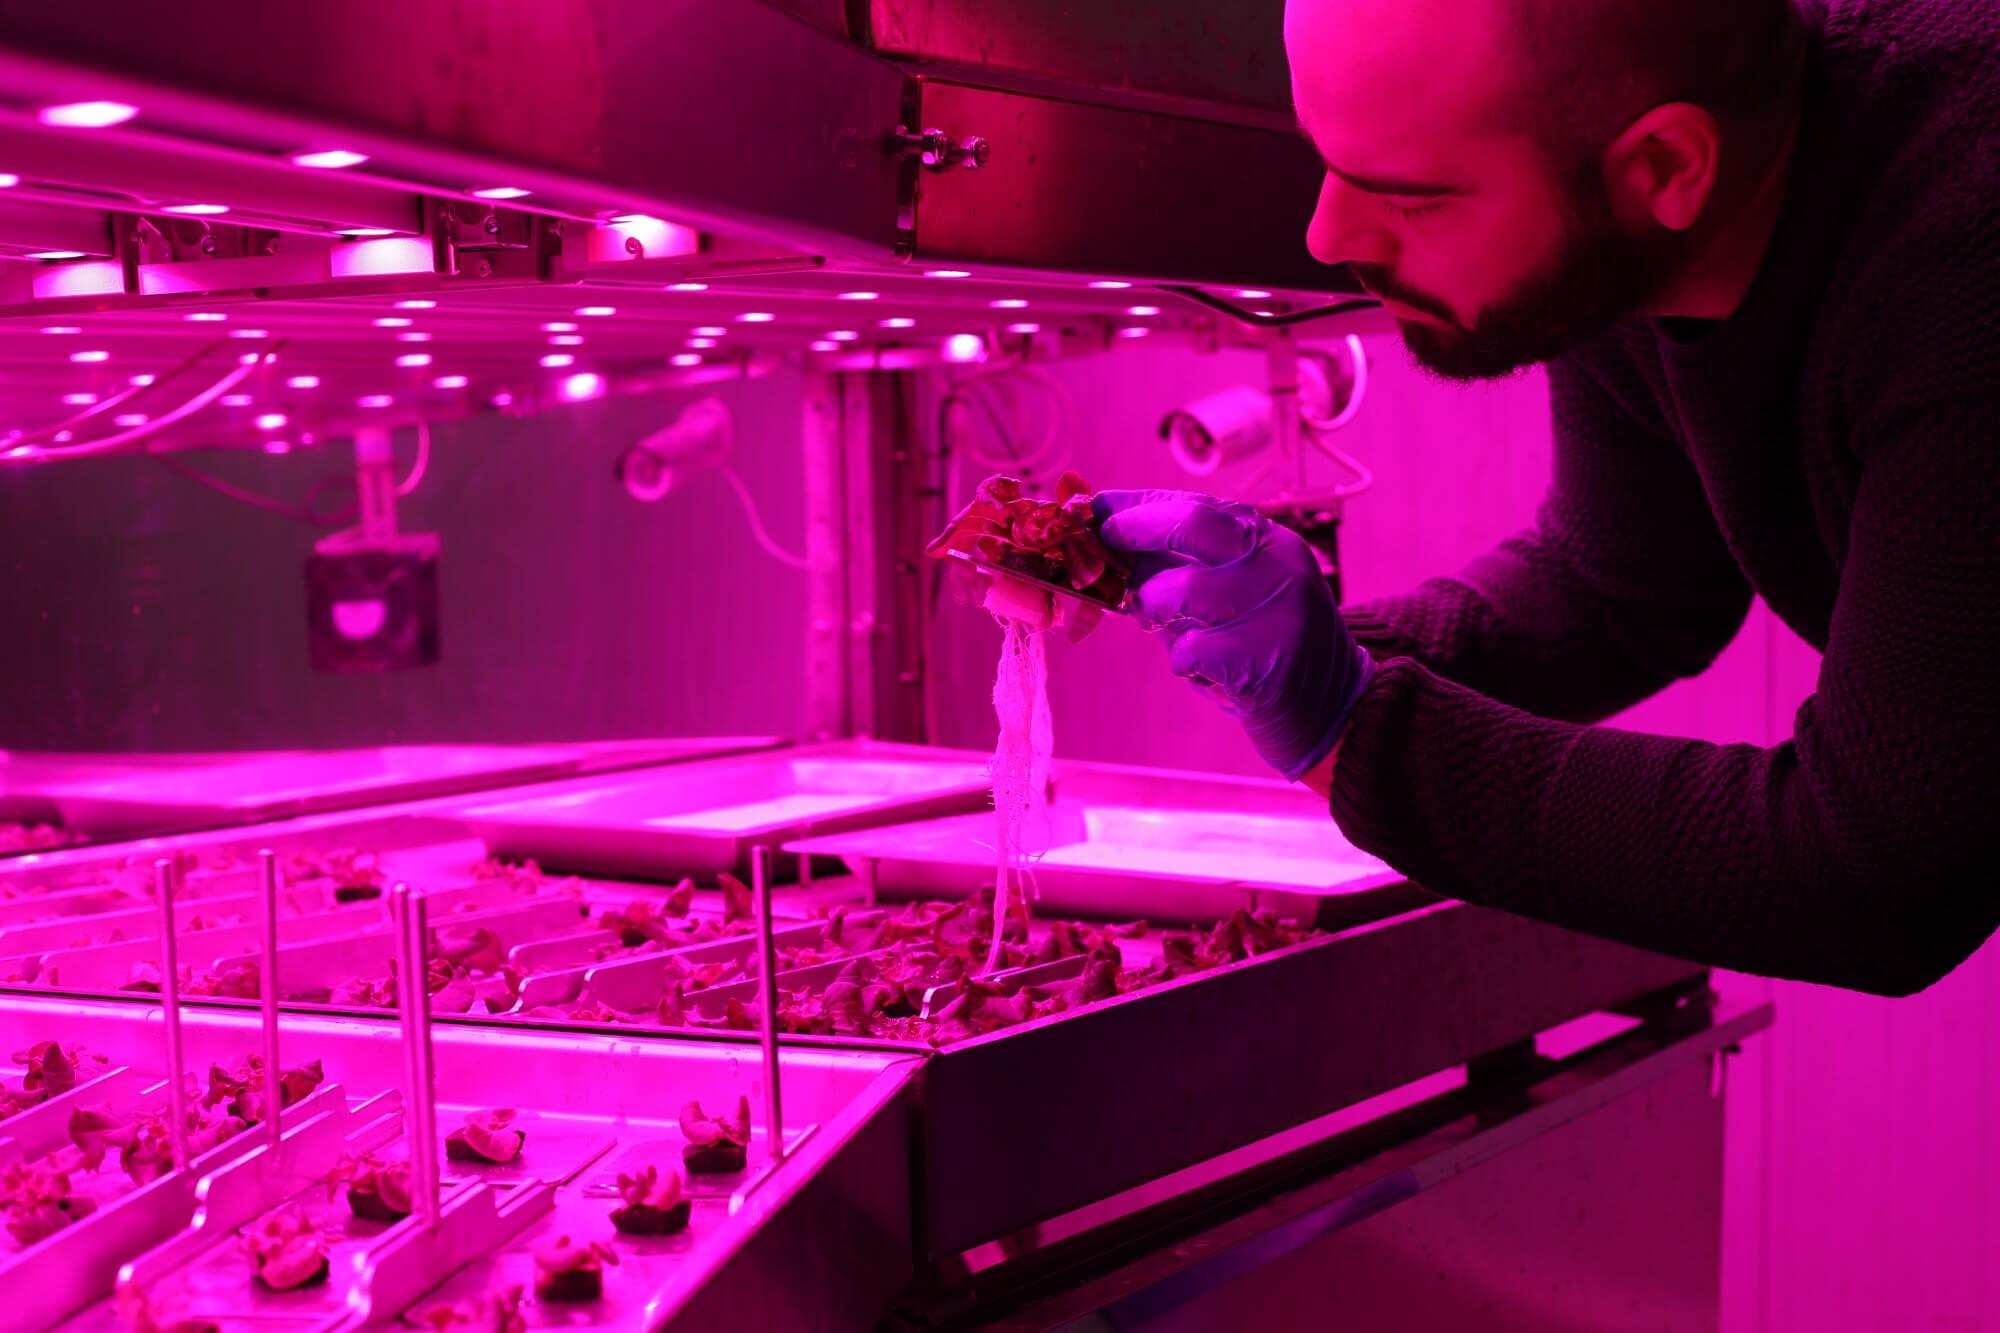 image of hydroponic cultivation